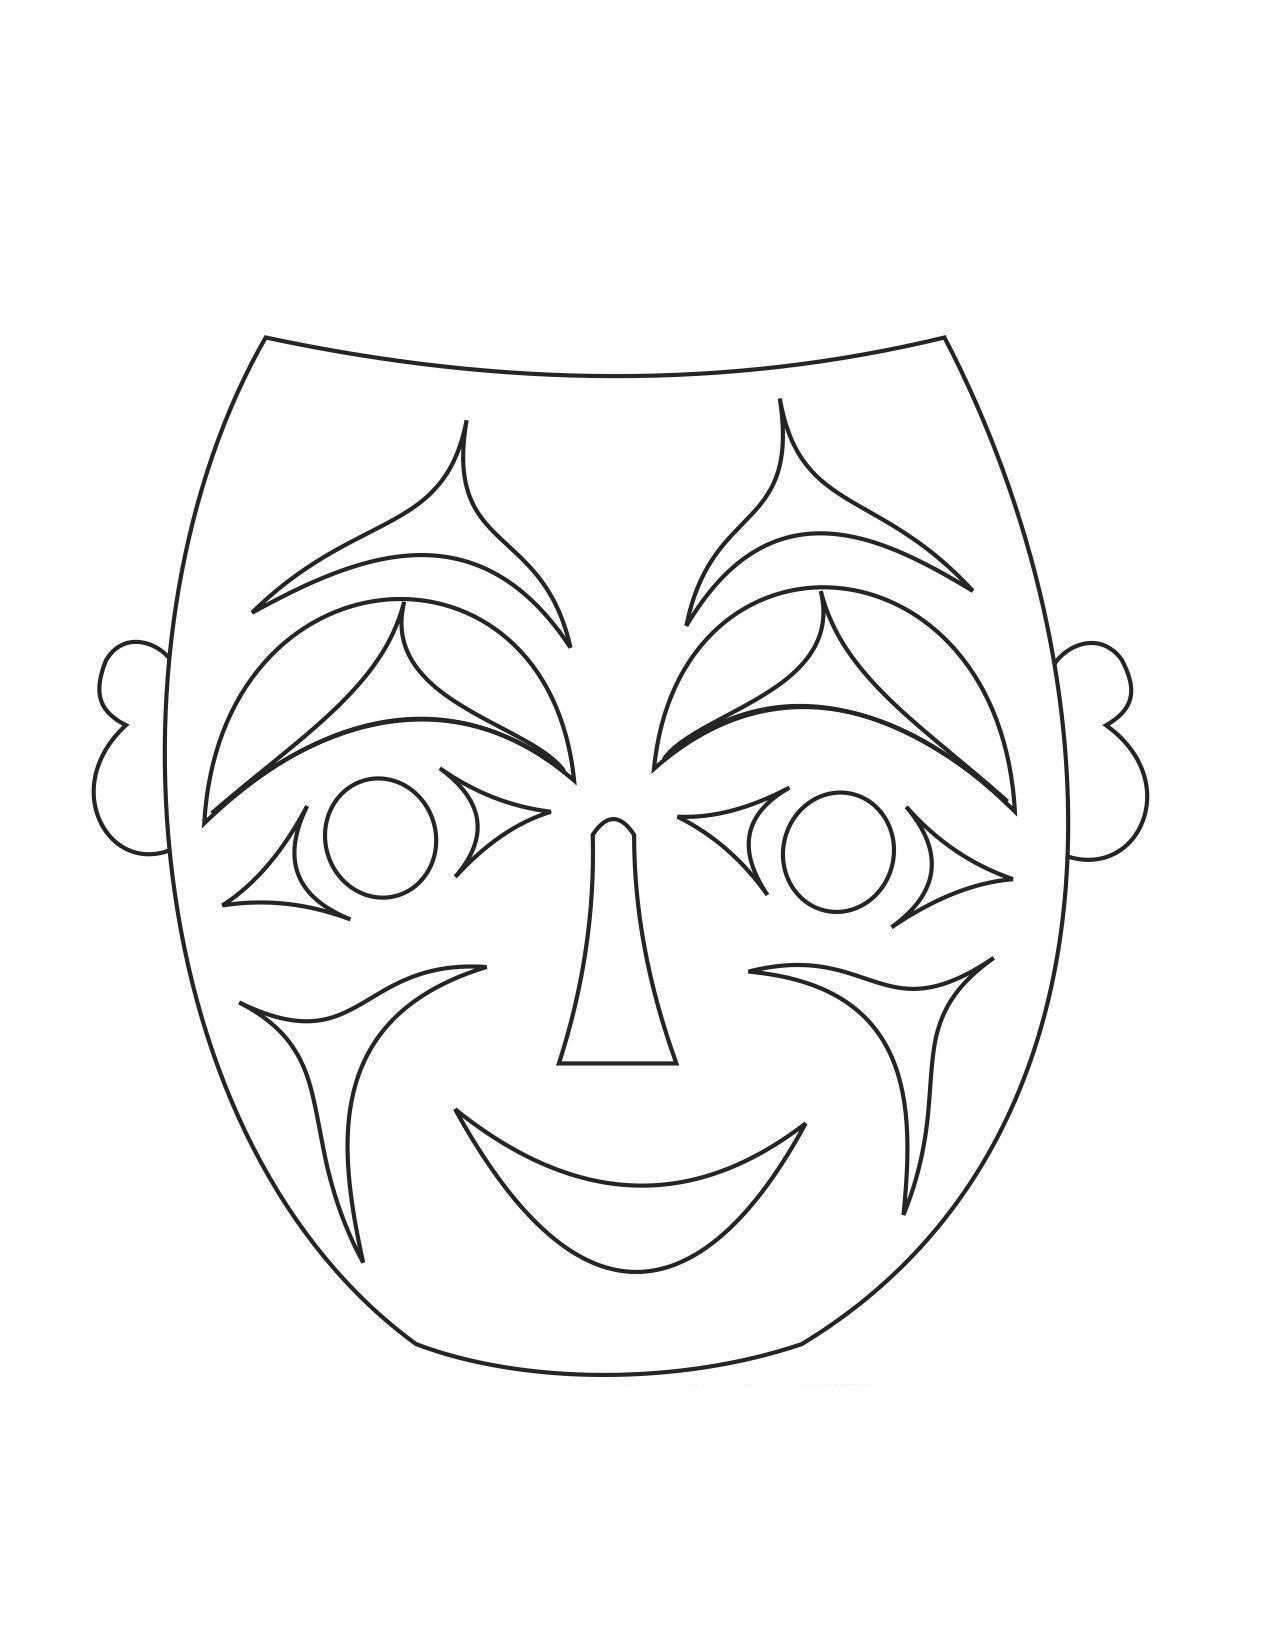 Coloring Funny mask. Category Masks . Tags:  mask.